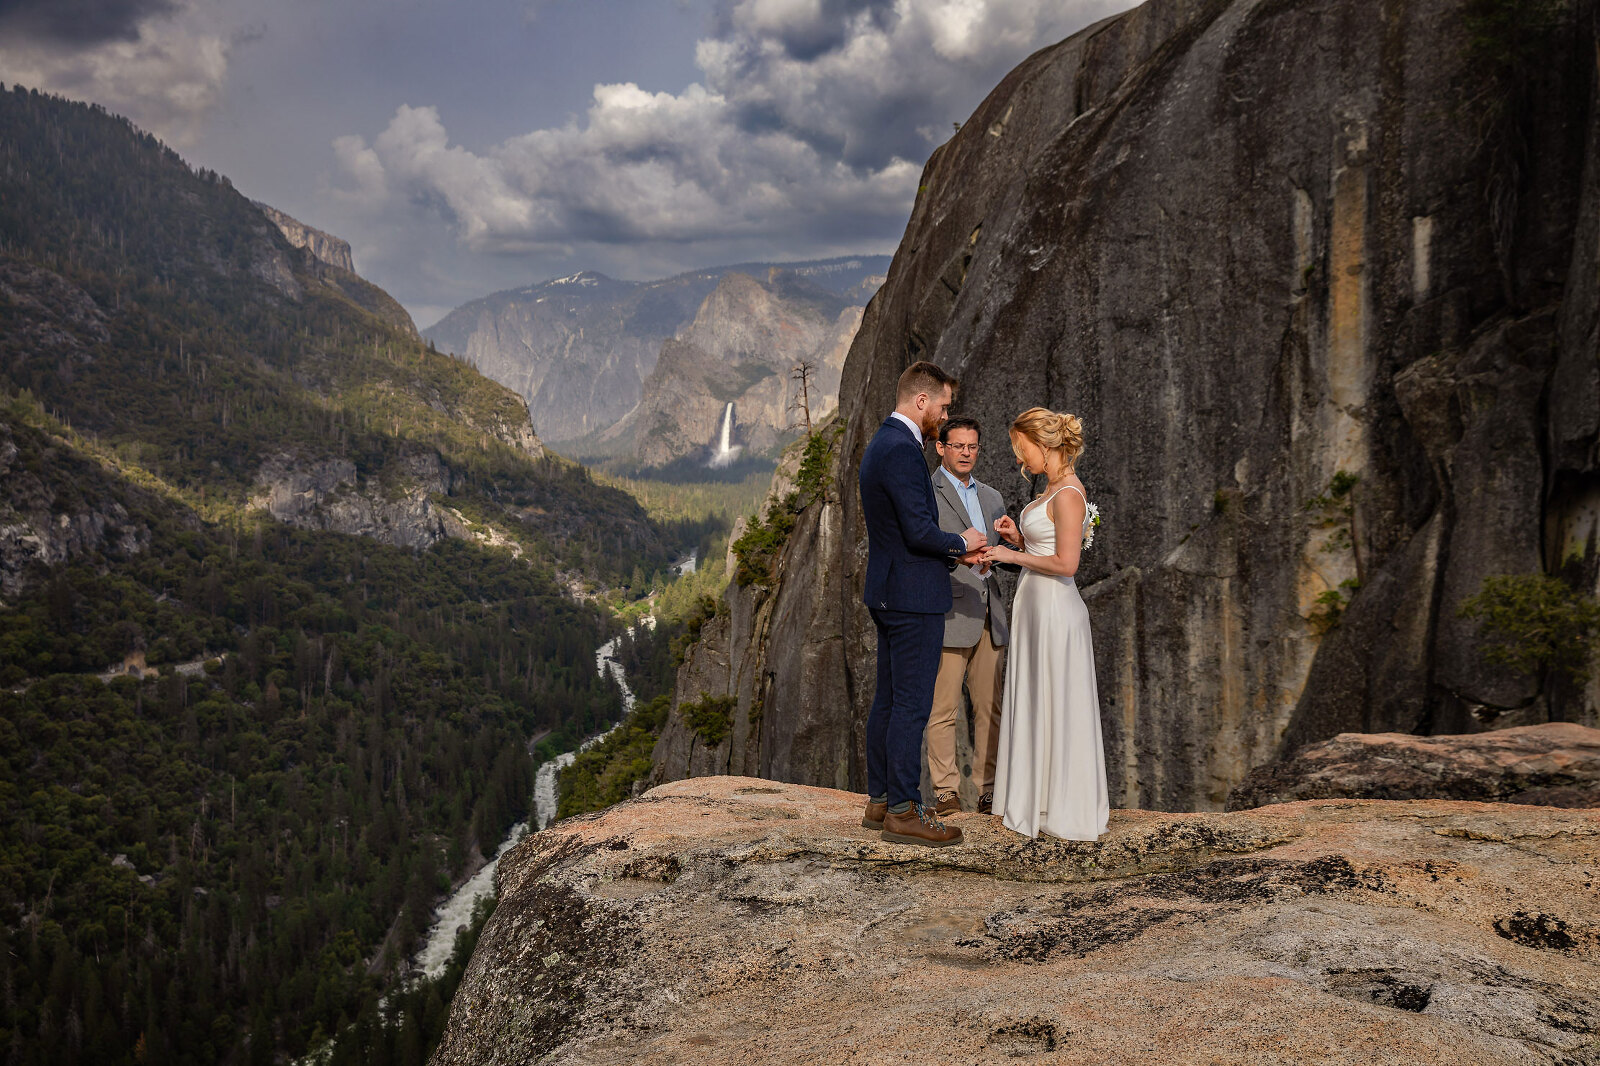 A Bride and Groom getting married on an edge of a cliff with a waterfall in the background